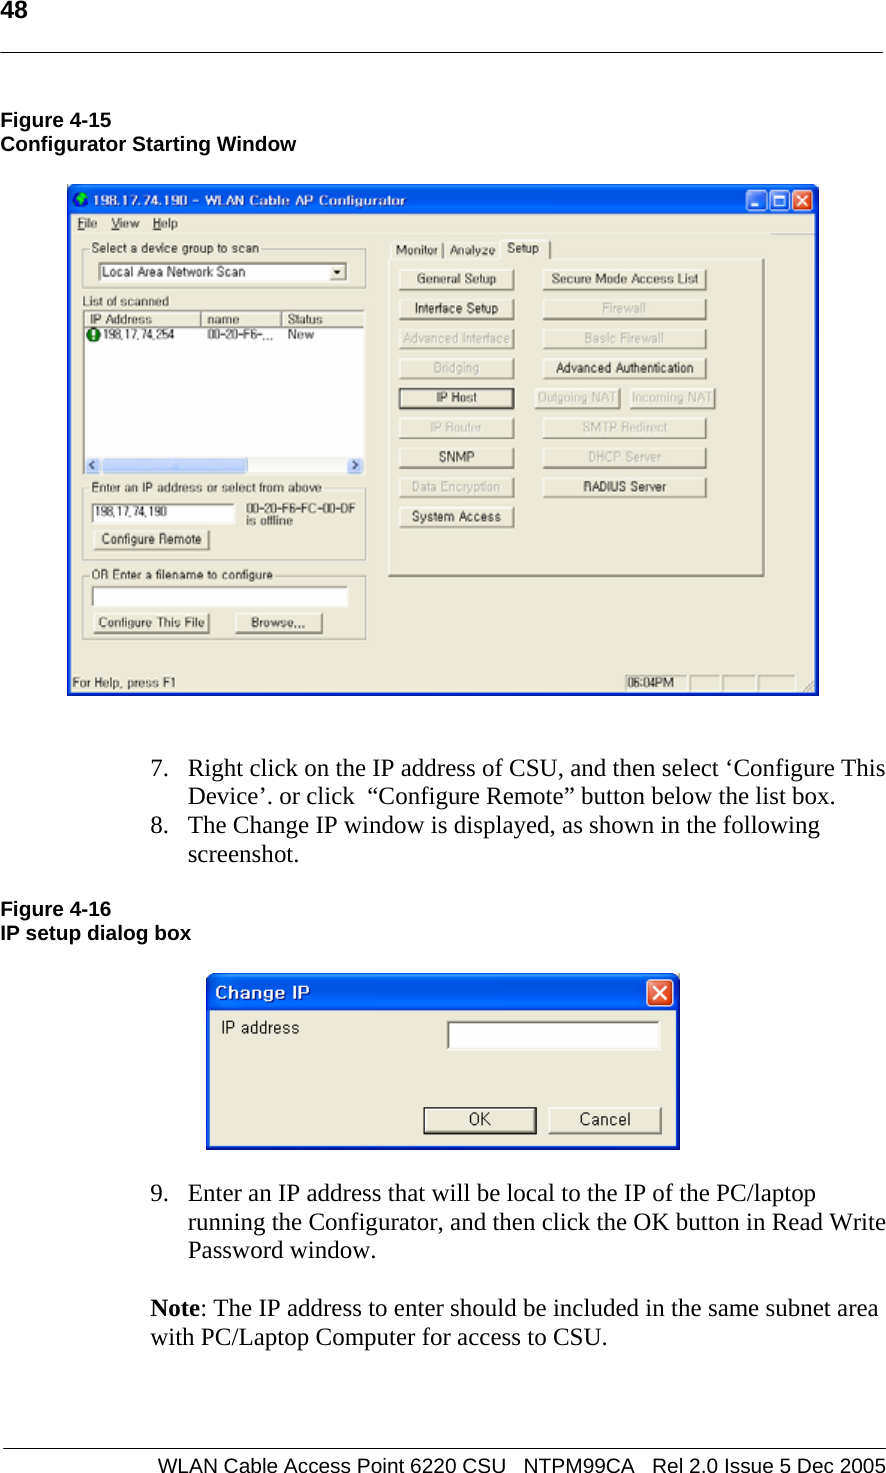   48  WLAN Cable Access Point 6220 CSU   NTPM99CA   Rel 2.0 Issue 5 Dec 2005 Figure 4-15 Configurator Starting Window      7. Right click on the IP address of CSU, and then select ‘Configure This Device’. or click  “Configure Remote” button below the list box.  8. The Change IP window is displayed, as shown in the following screenshot.  Figure 4-16 IP setup dialog box    9. Enter an IP address that will be local to the IP of the PC/laptop running the Configurator, and then click the OK button in Read Write Password window.    Note: The IP address to enter should be included in the same subnet area with PC/Laptop Computer for access to CSU.   